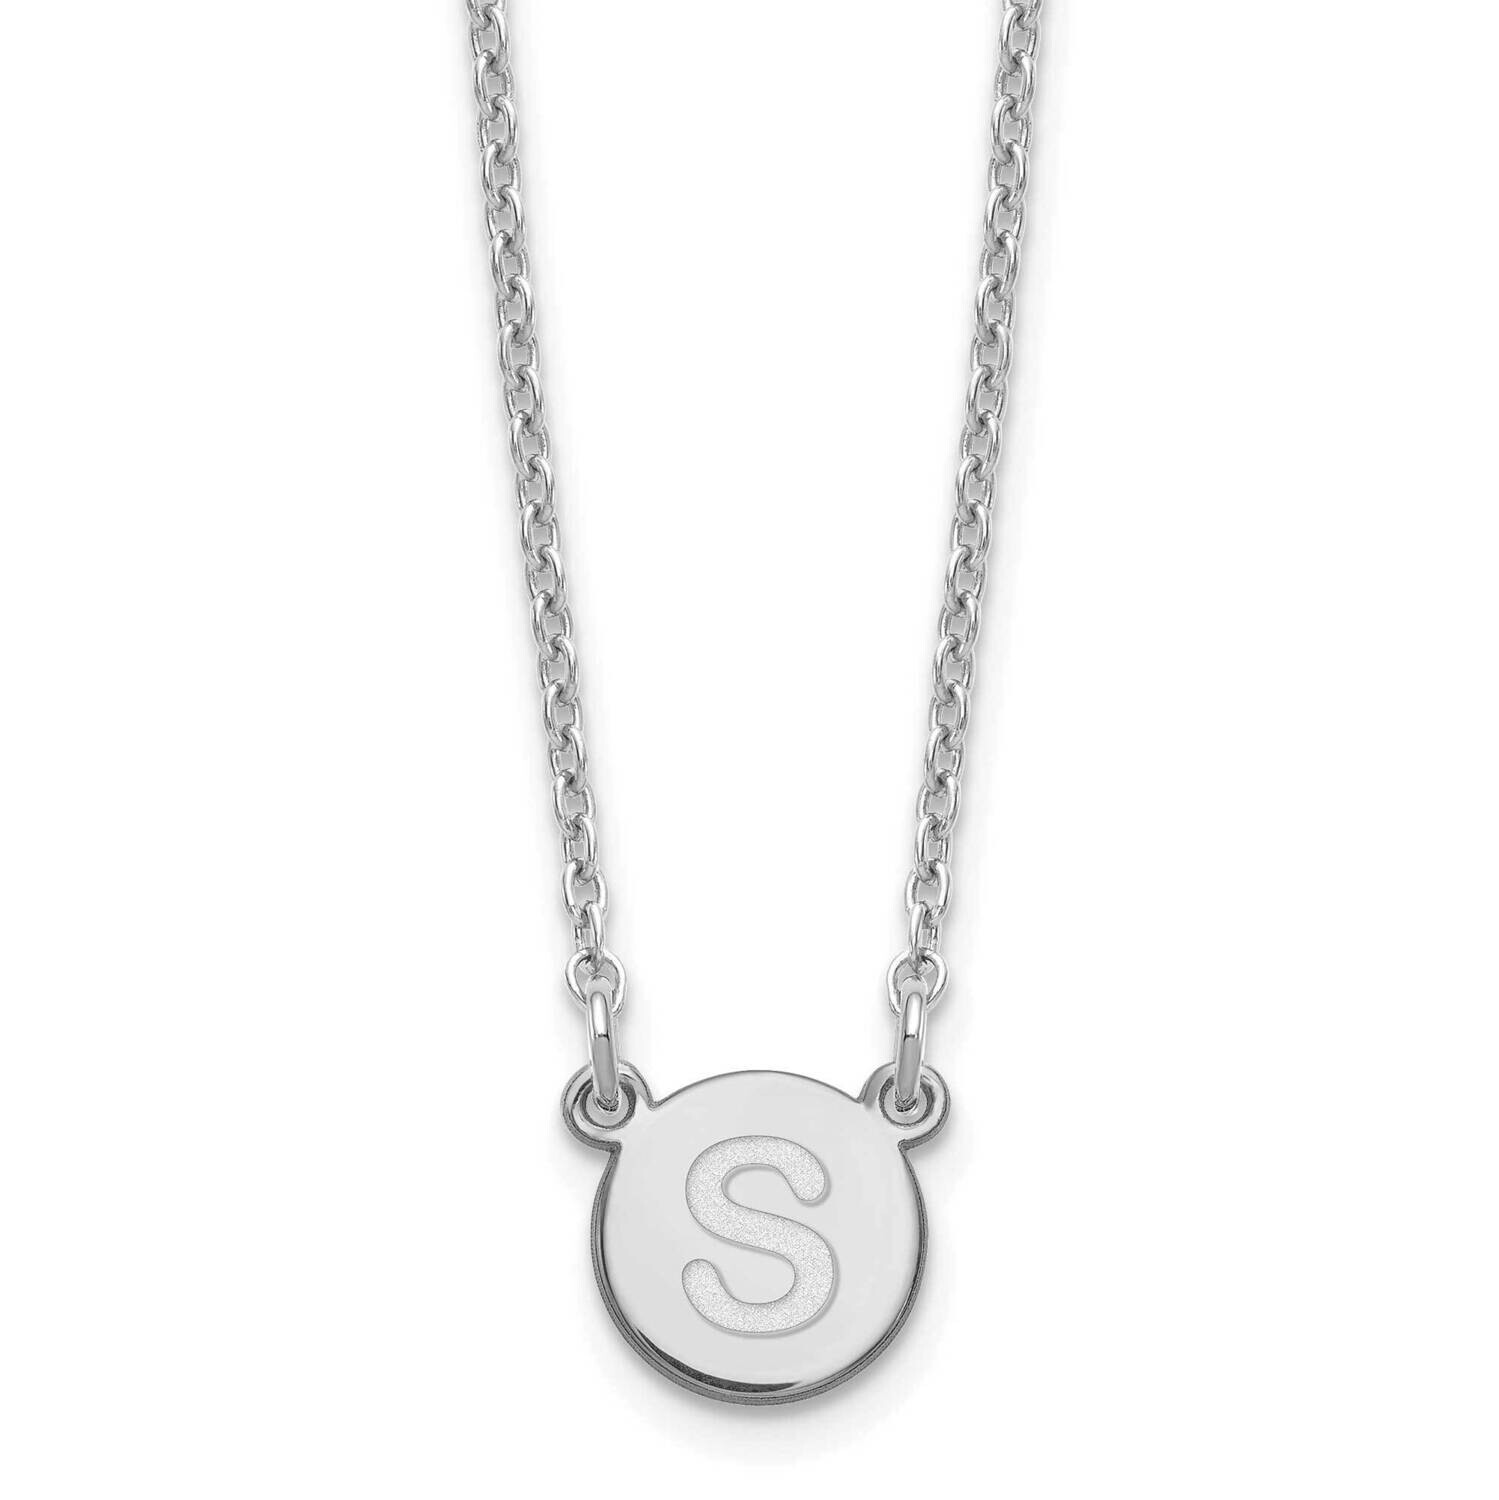 Tiny Circle Block Letter S Initial Necklace Sterling Silver Rhodium-Plated XNA722SS/S